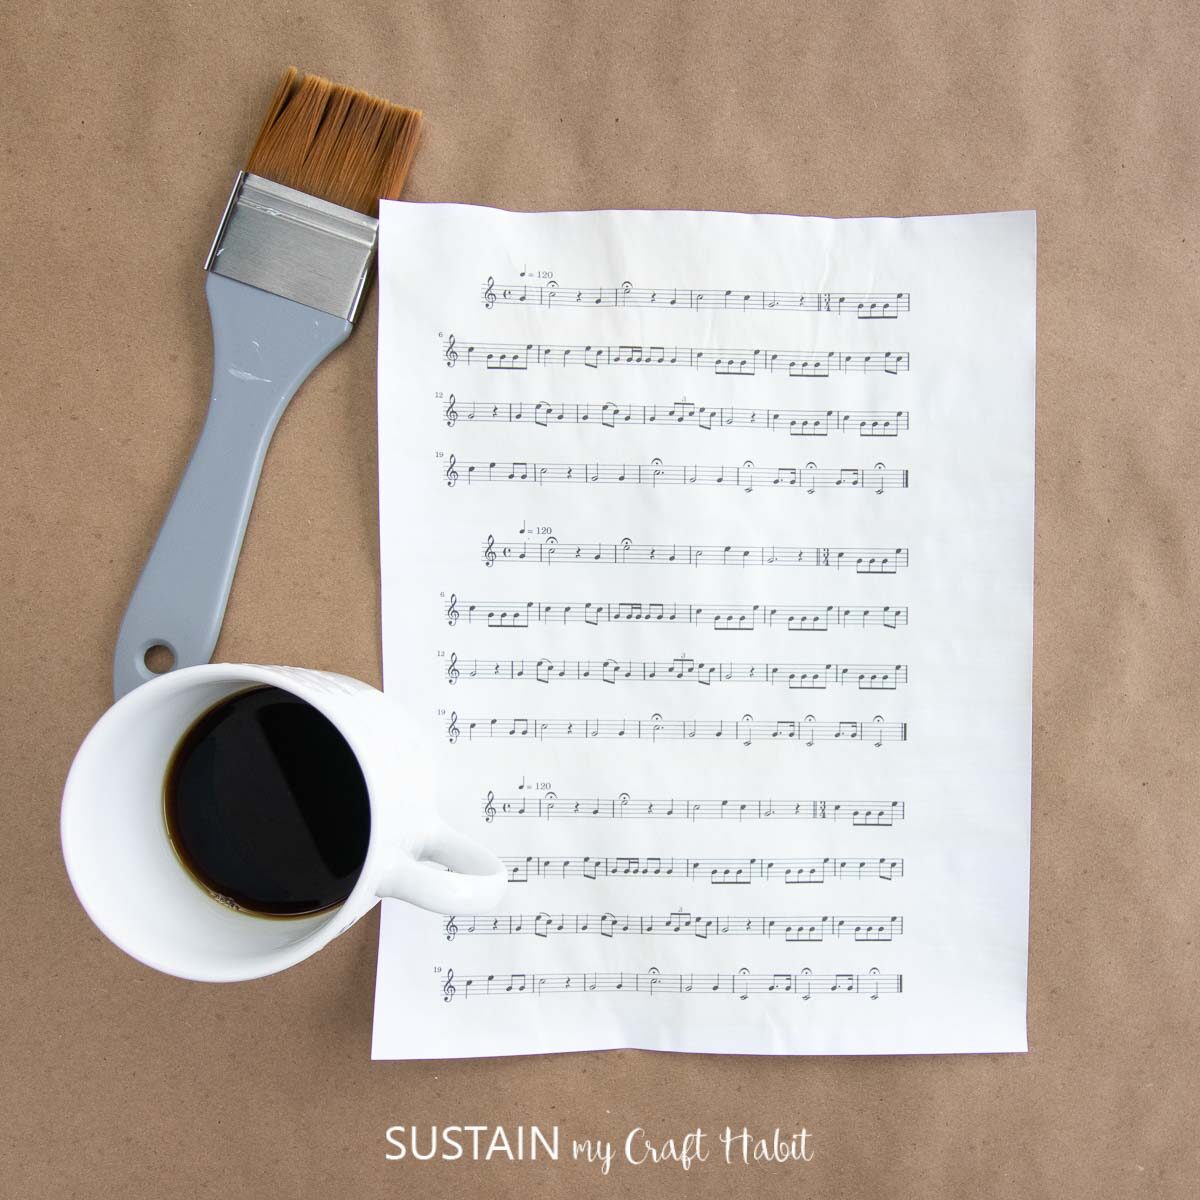 Music sheet next to a paint brush and a cup of coffee.